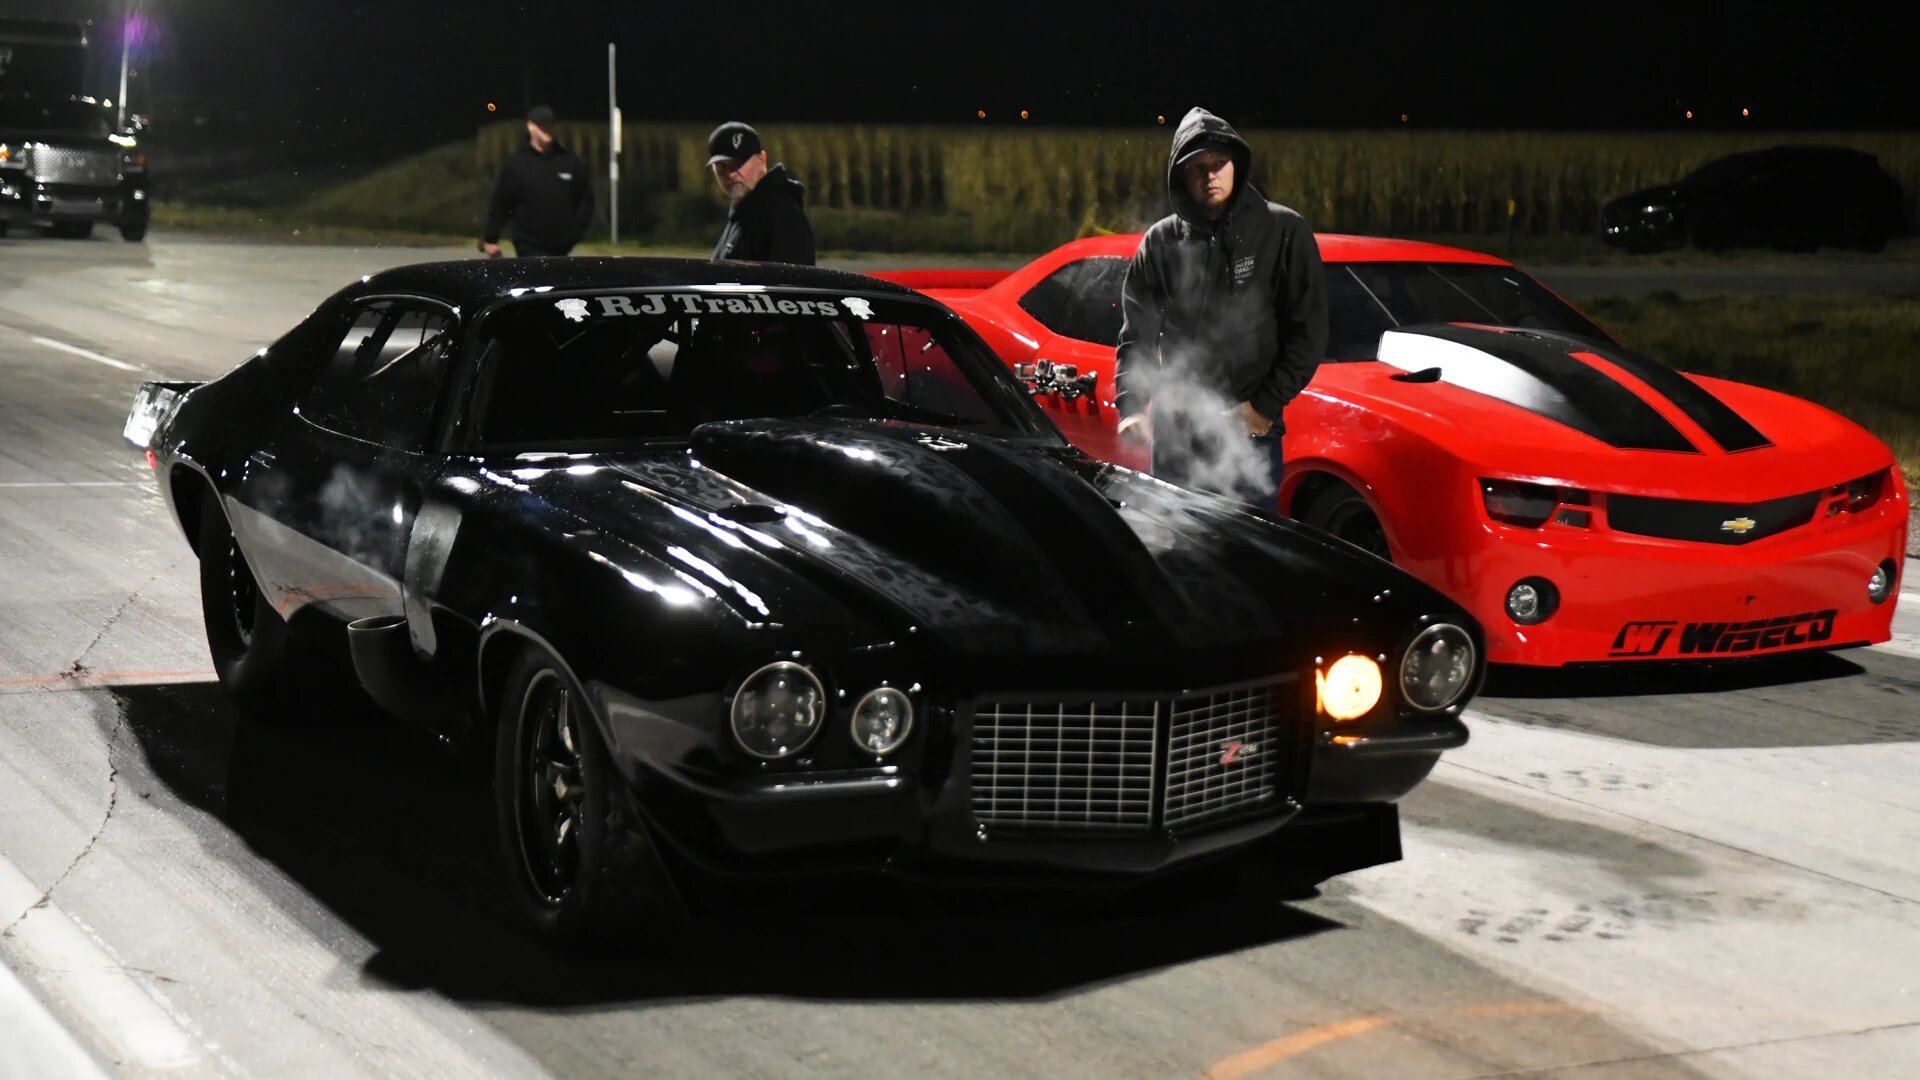 Street Outlaws Show Summary, Episodes and TV Guide from onmy